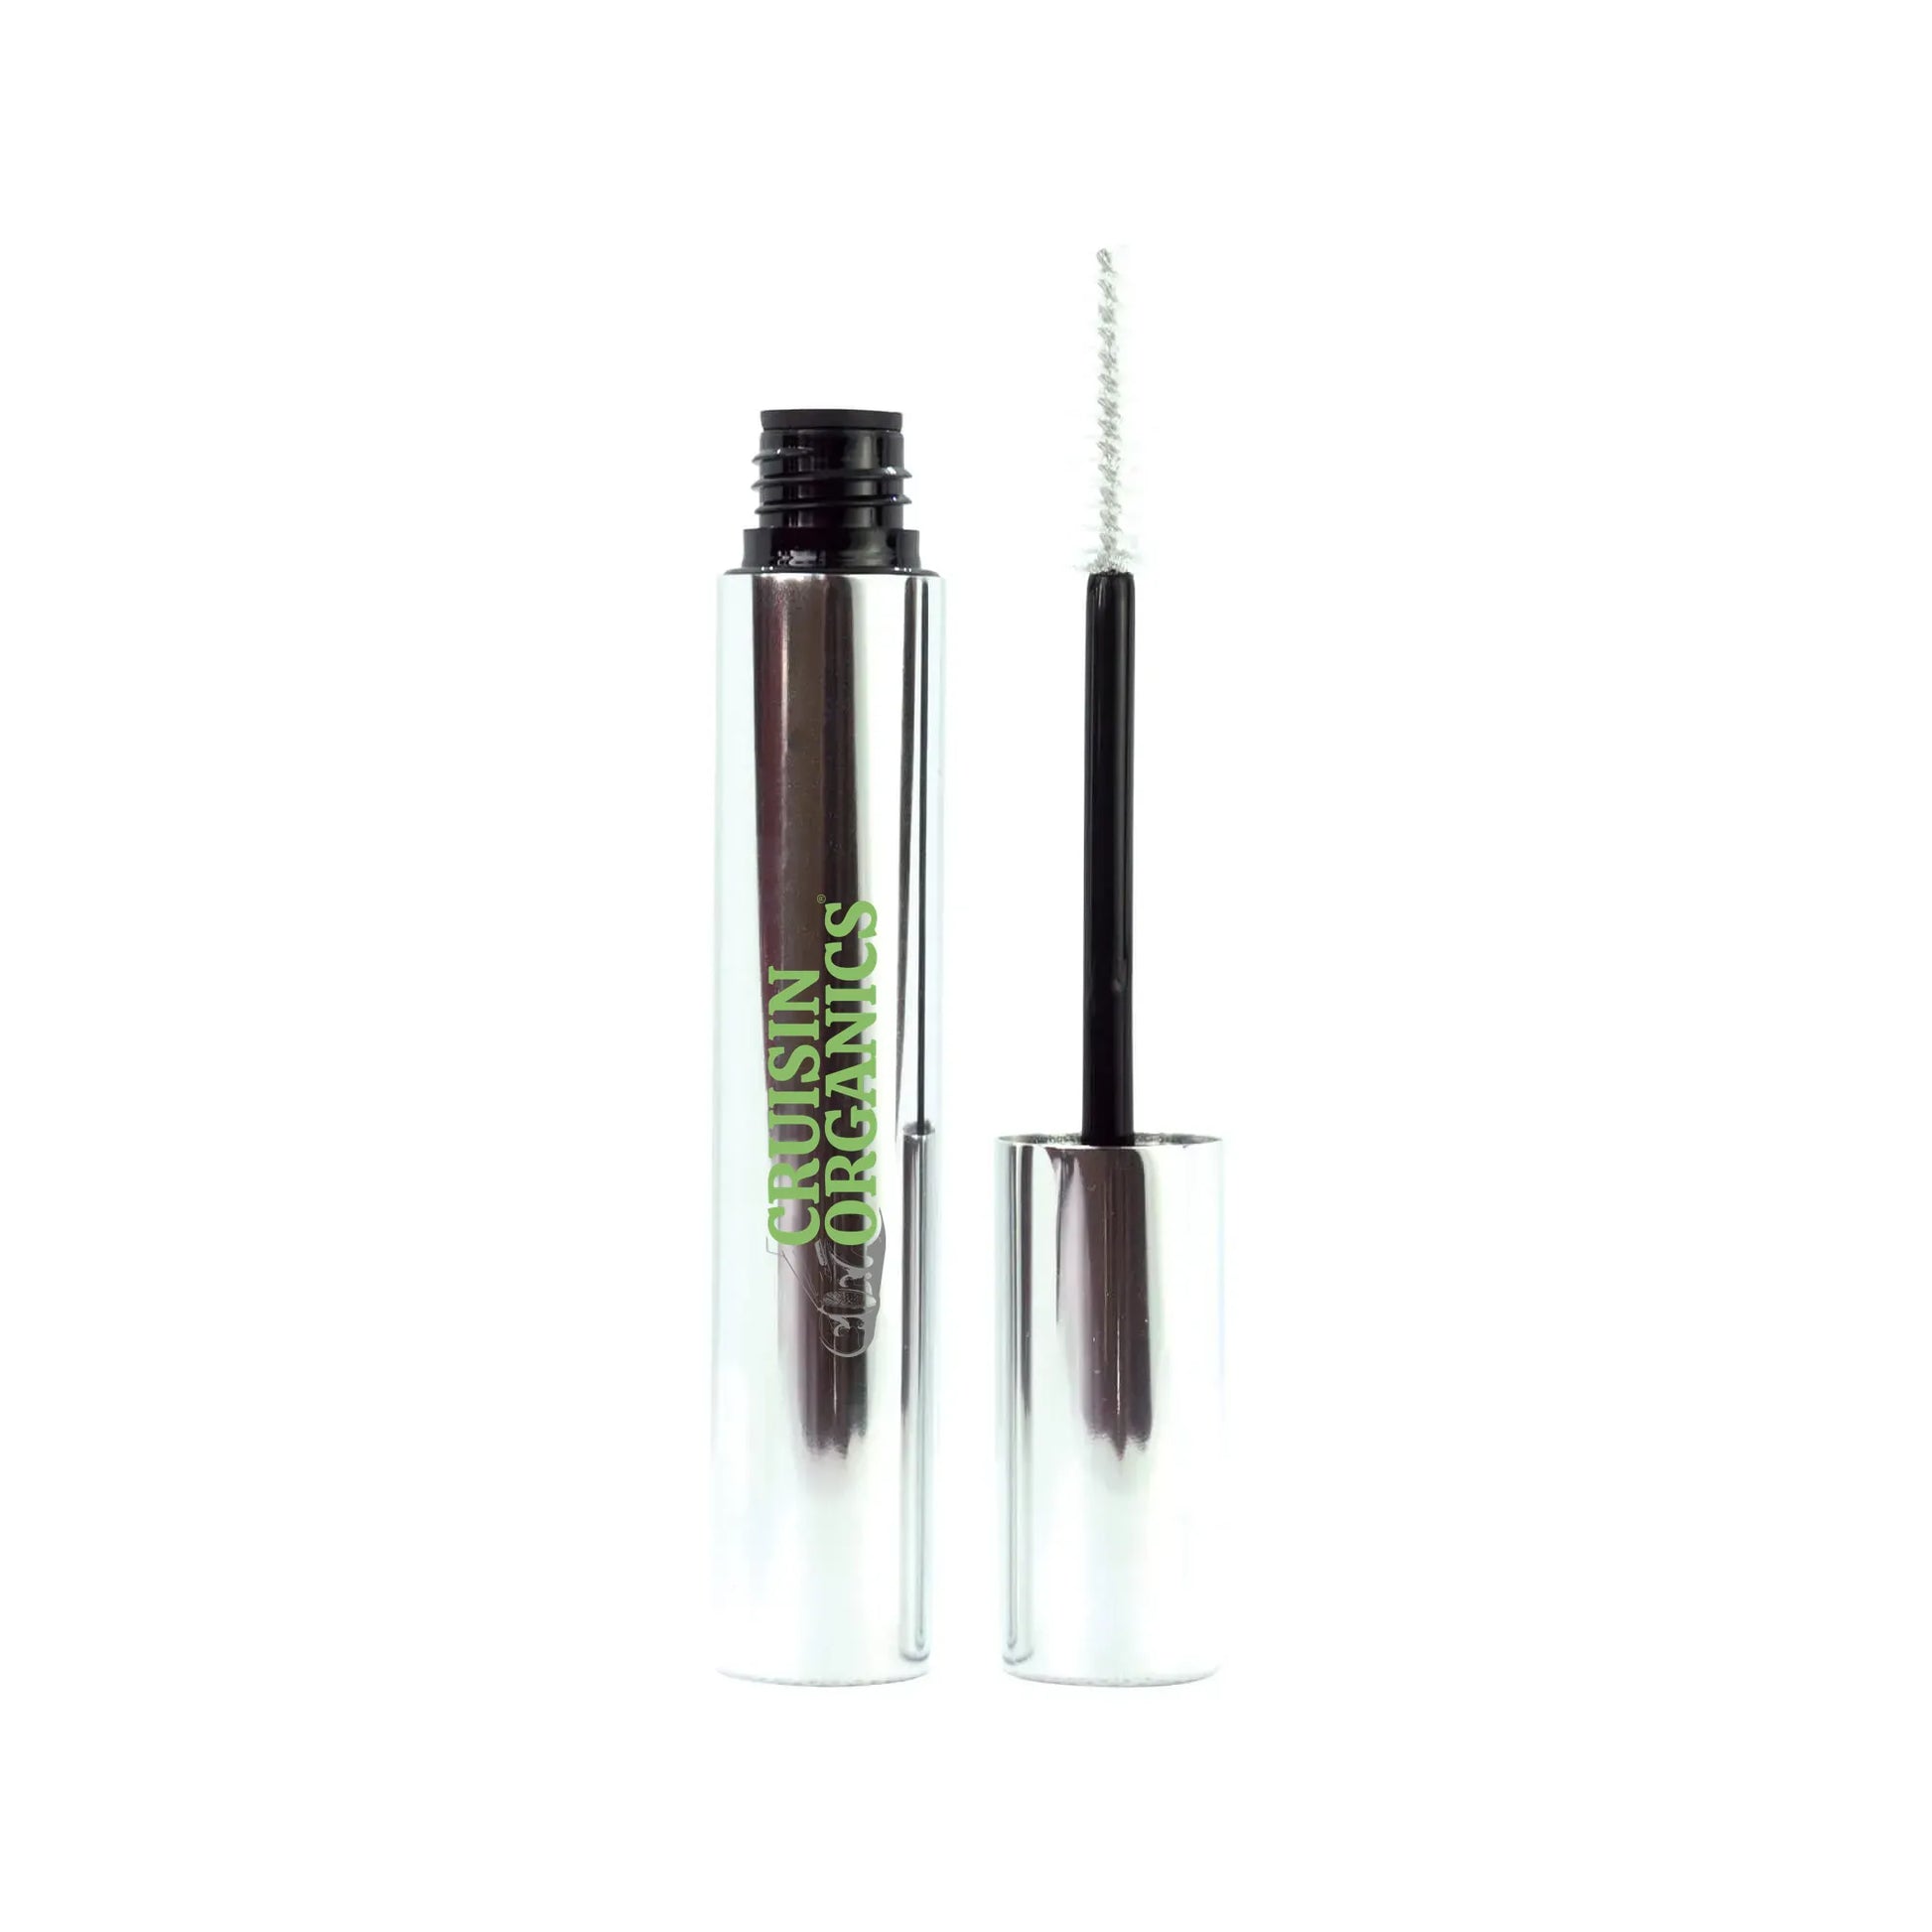 Groom your brows in an instant with our clear eyebrow gel. The clear formula is the universal match for any hair color and all complexions. Our Cruisin Organics eyebrow gel will visibly shape and fluff your brows to achieve your desired look with an easy, comfortable swipe. Our formula provides a flexible hold for your brows to shape naturally as they are, and the clear formula will never leave a trace!